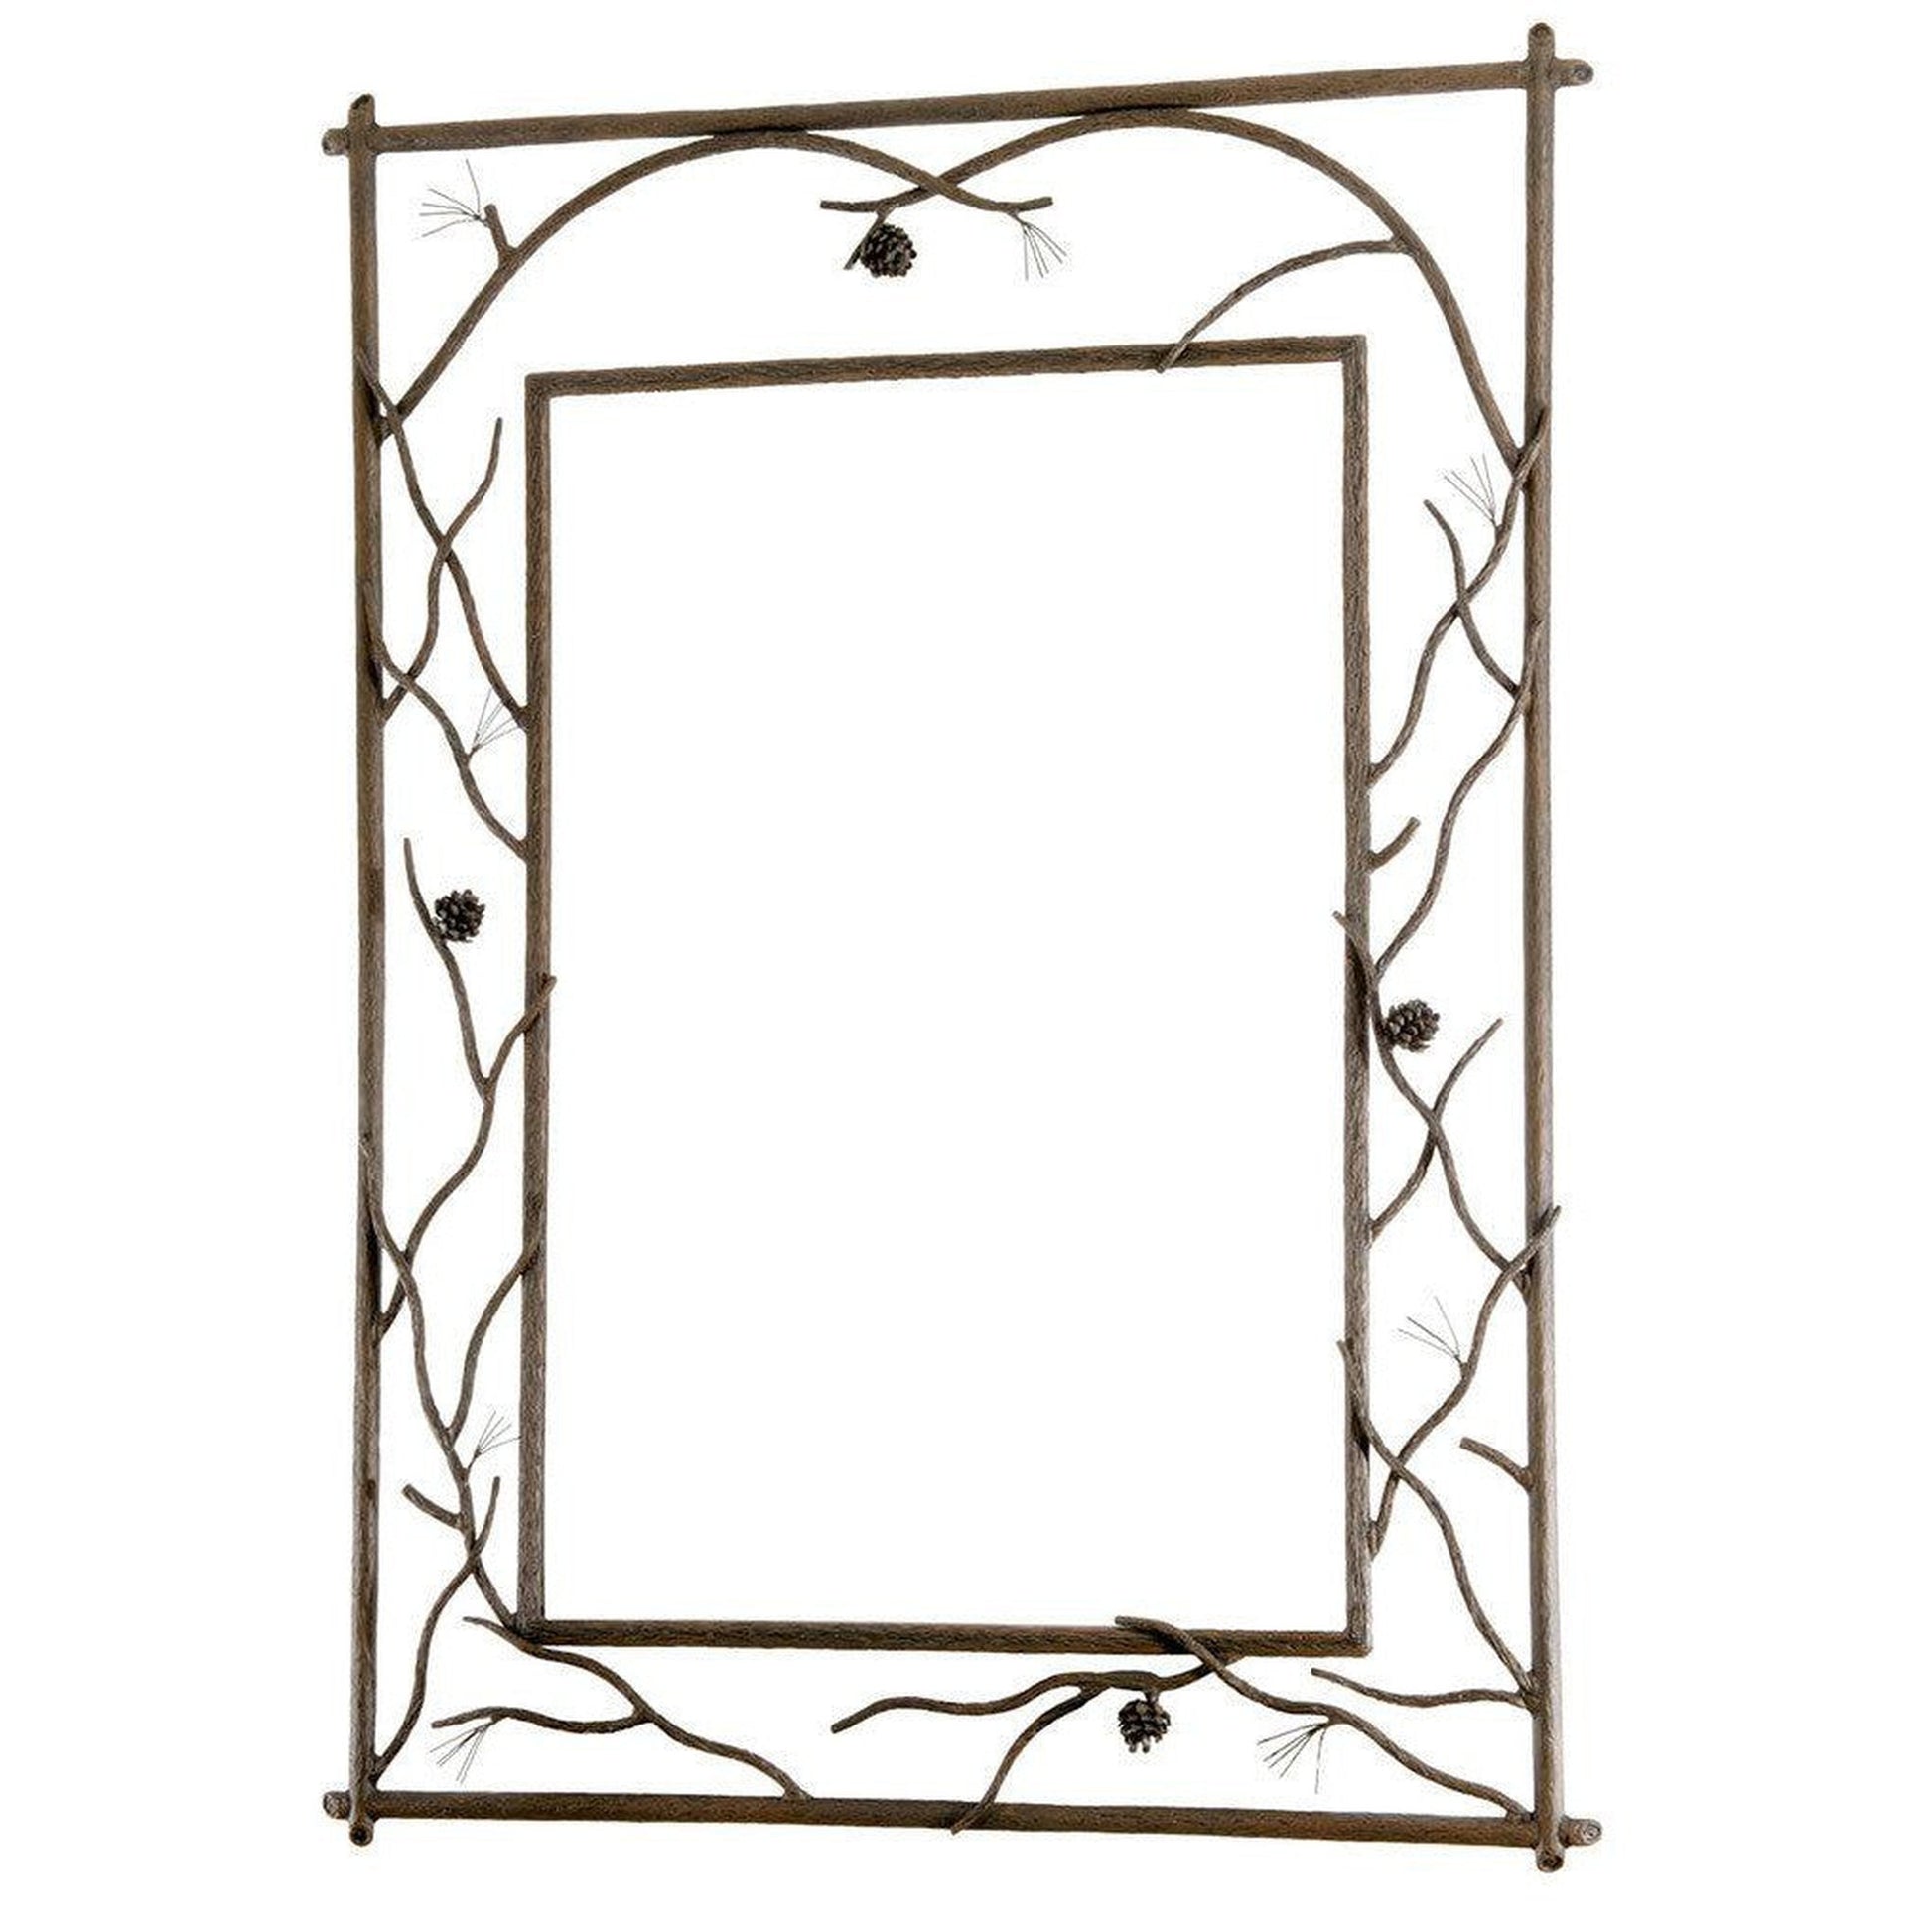 Stone County Ironworks Pine 37" x 51" Large Burnished Gold Branched Iron Wall Mirror With Pewter Iron Accent